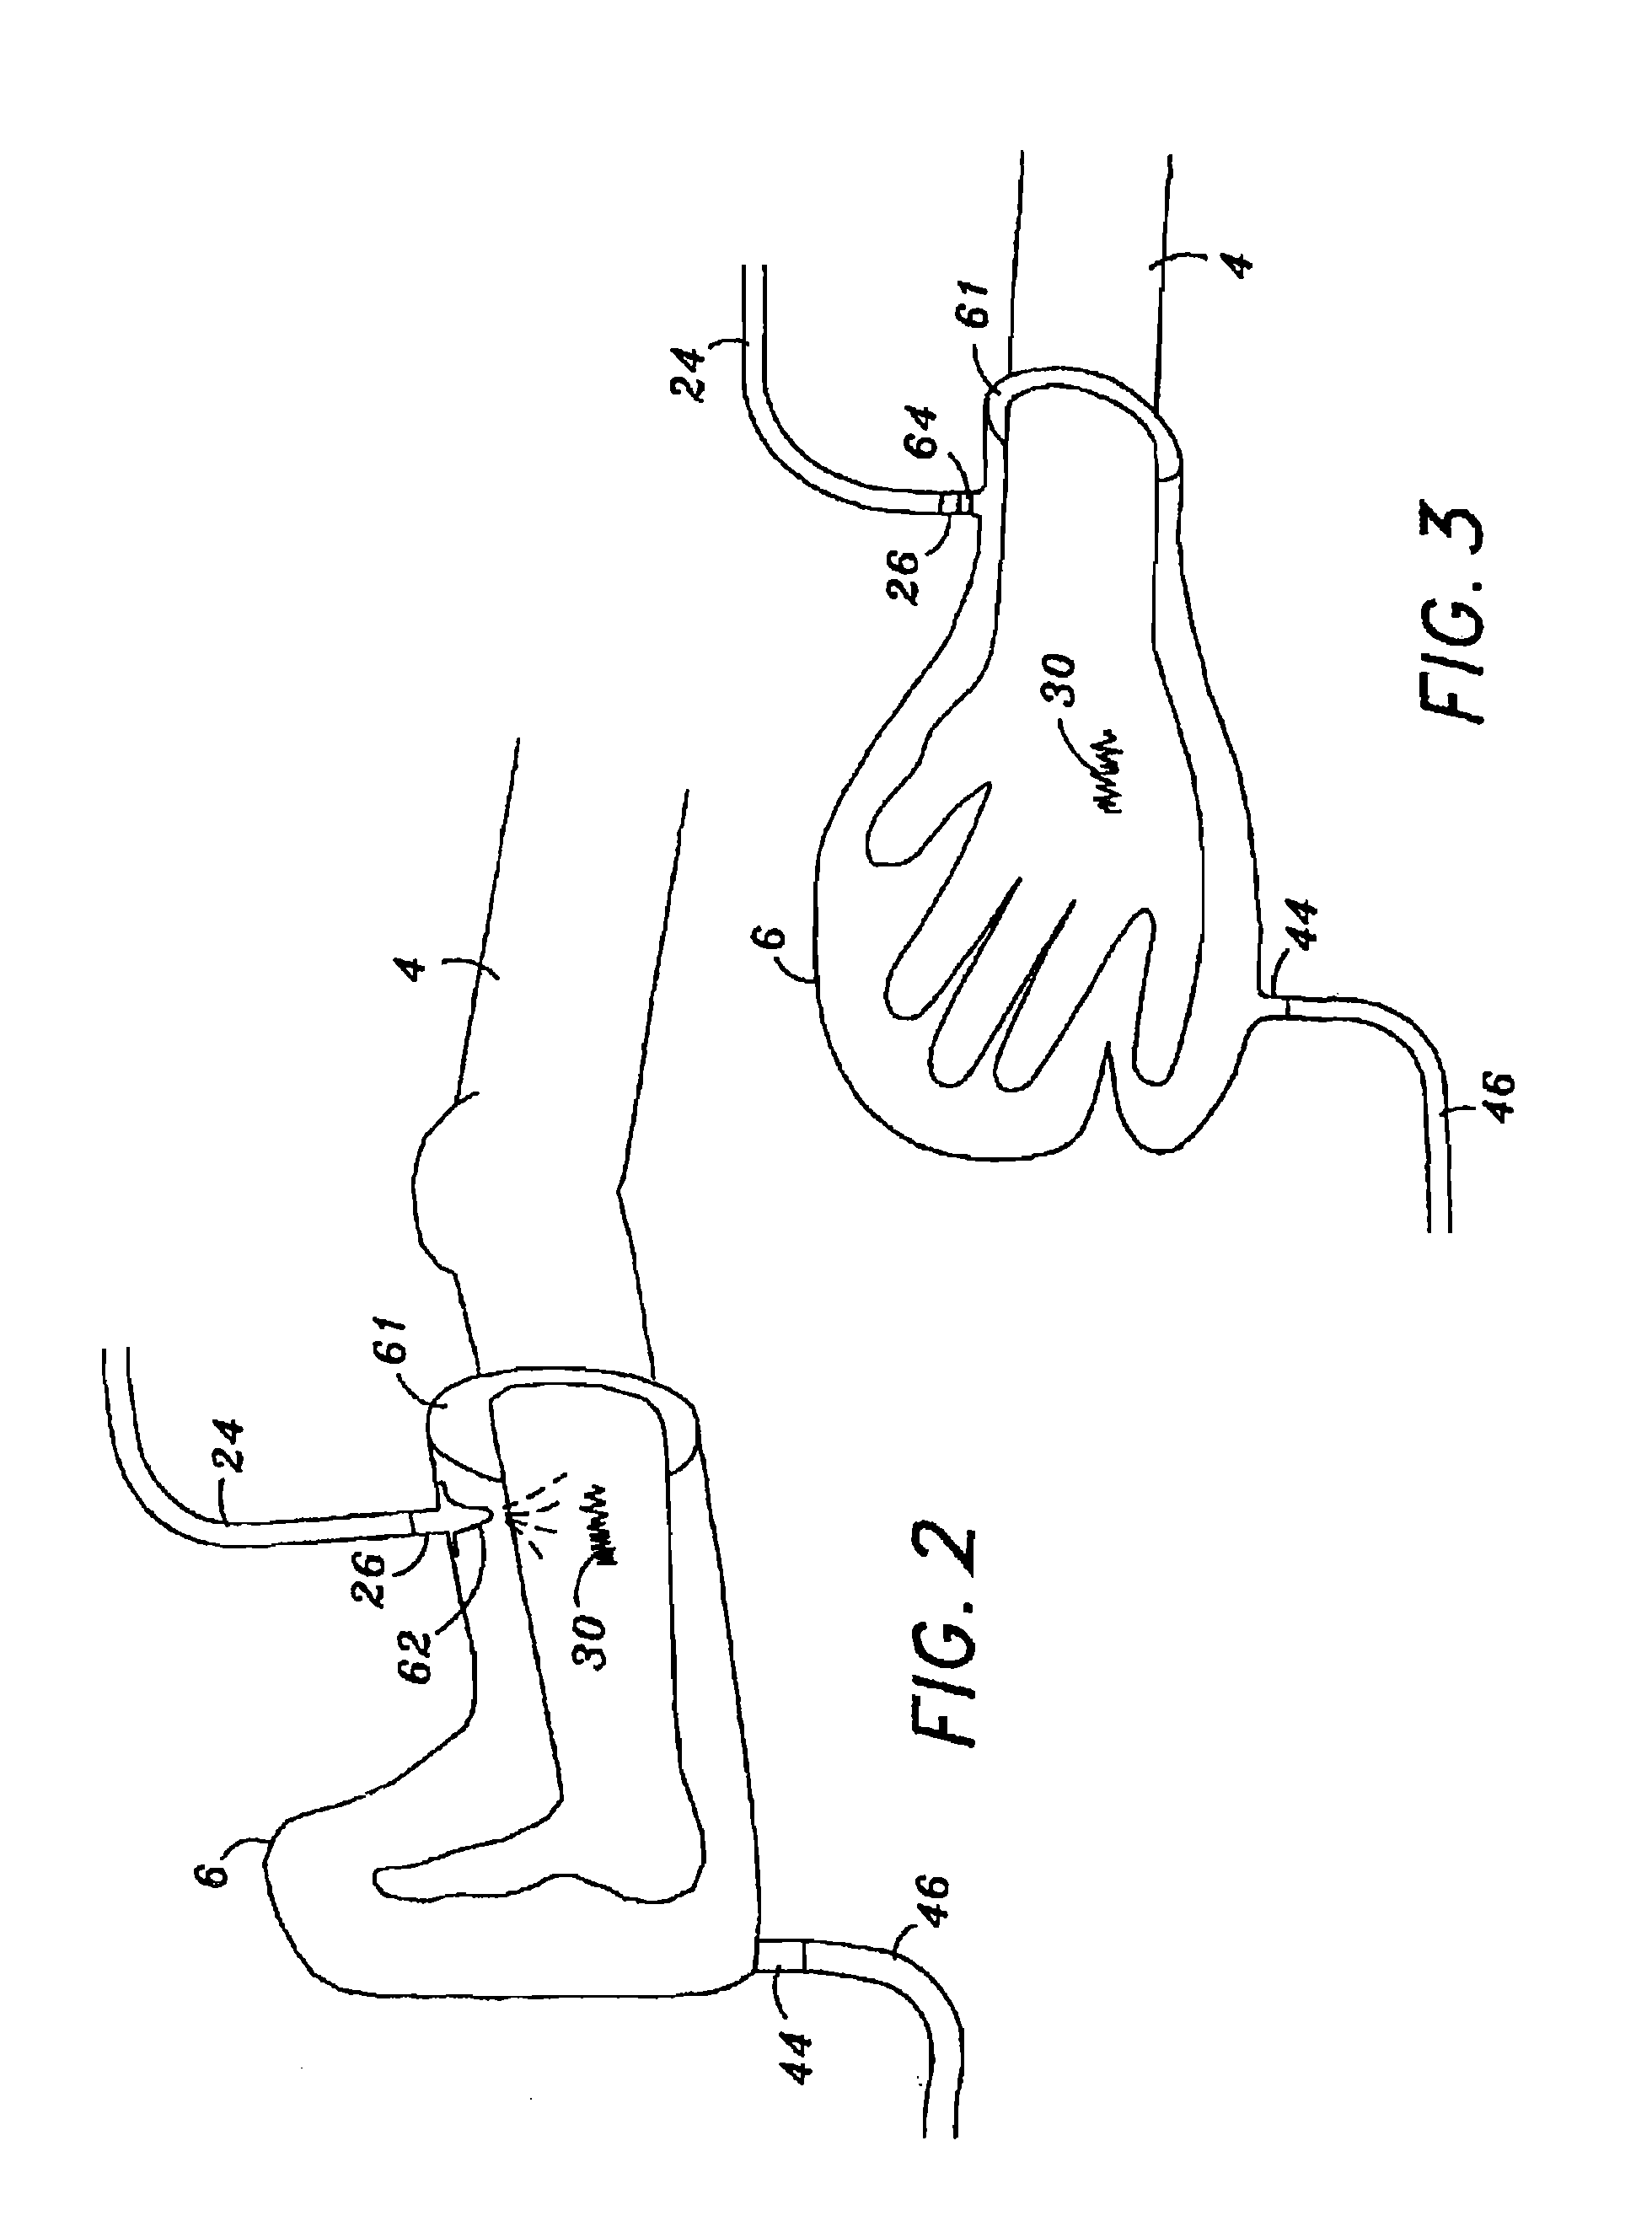 Methods of Treating An Infection with Nitric Oxide